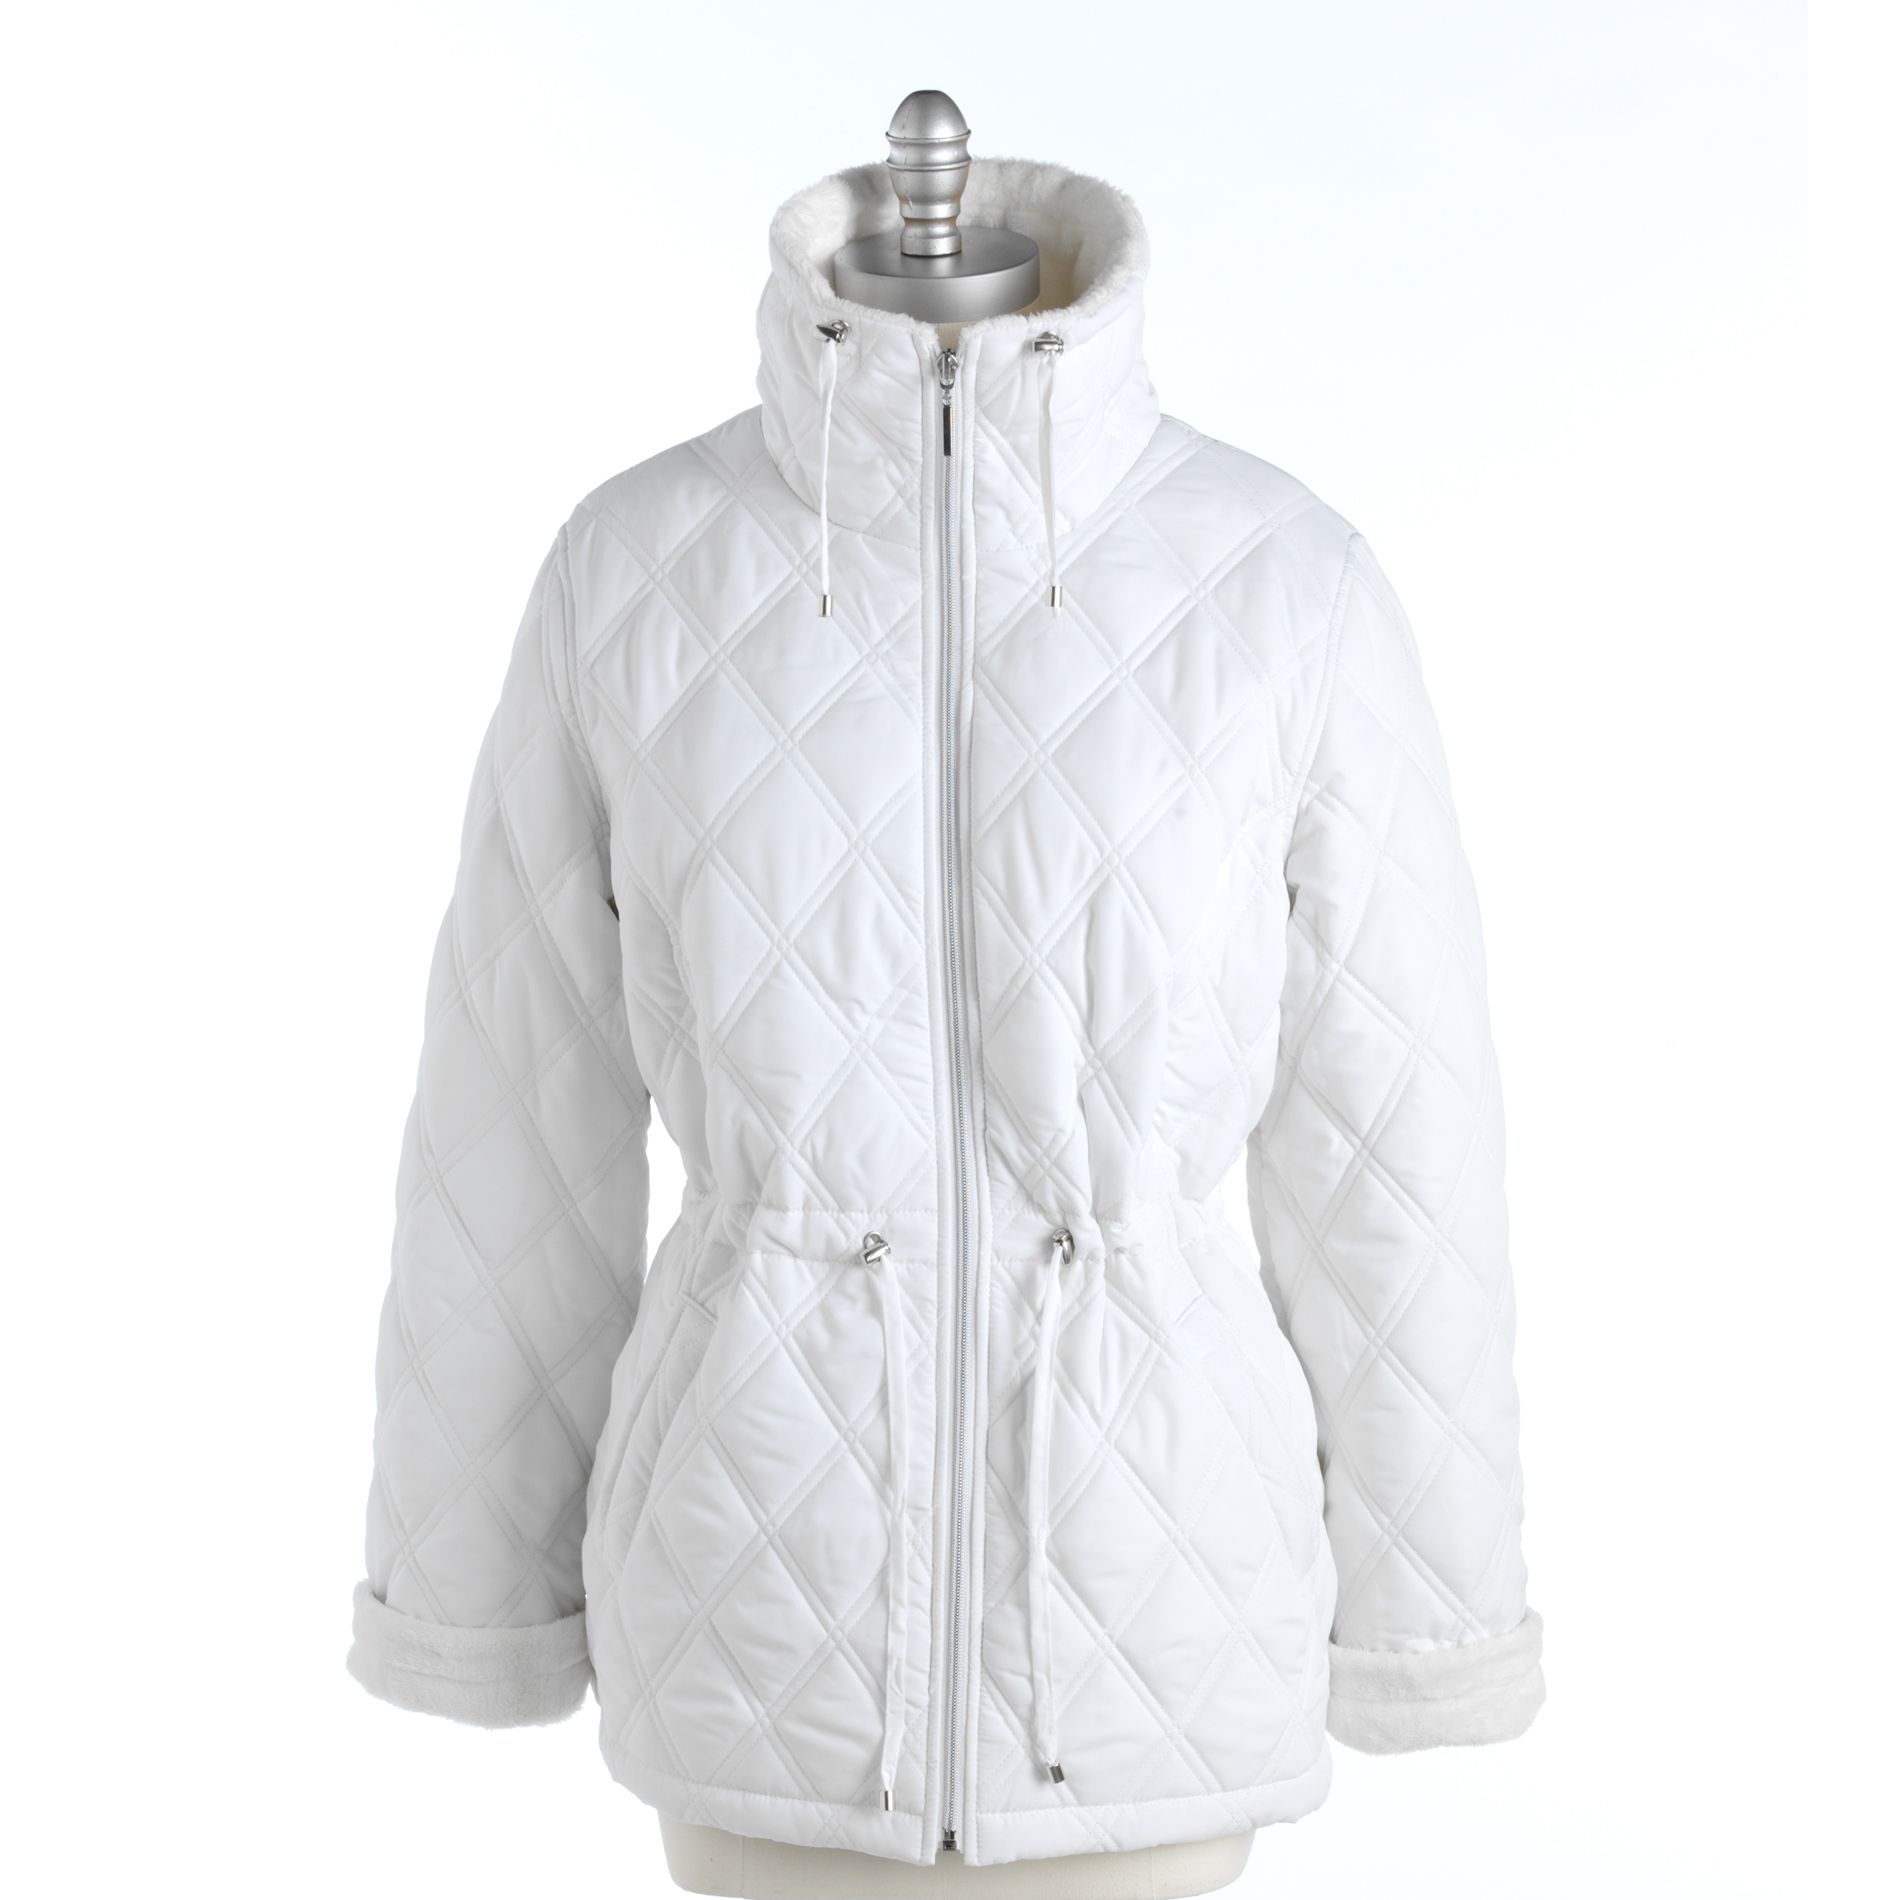 Weathercast Matted Poly Diamond Quilt Anorak